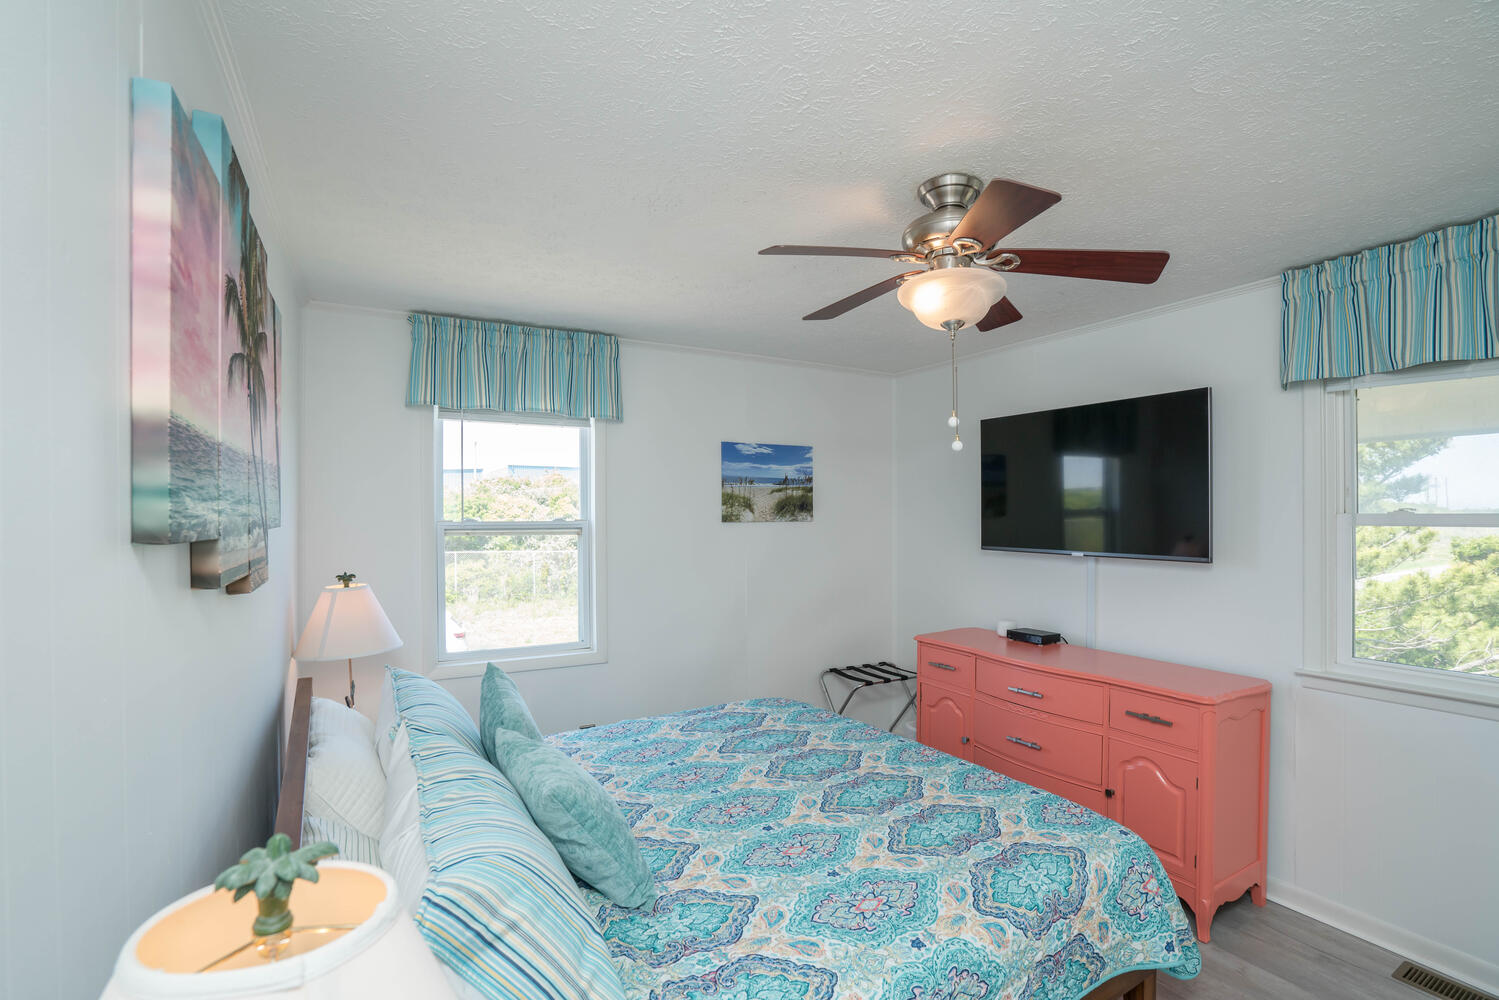 Pet friendly private ocean front cottage nestled in peaceful Caswell Beach.  Running Down A Dream